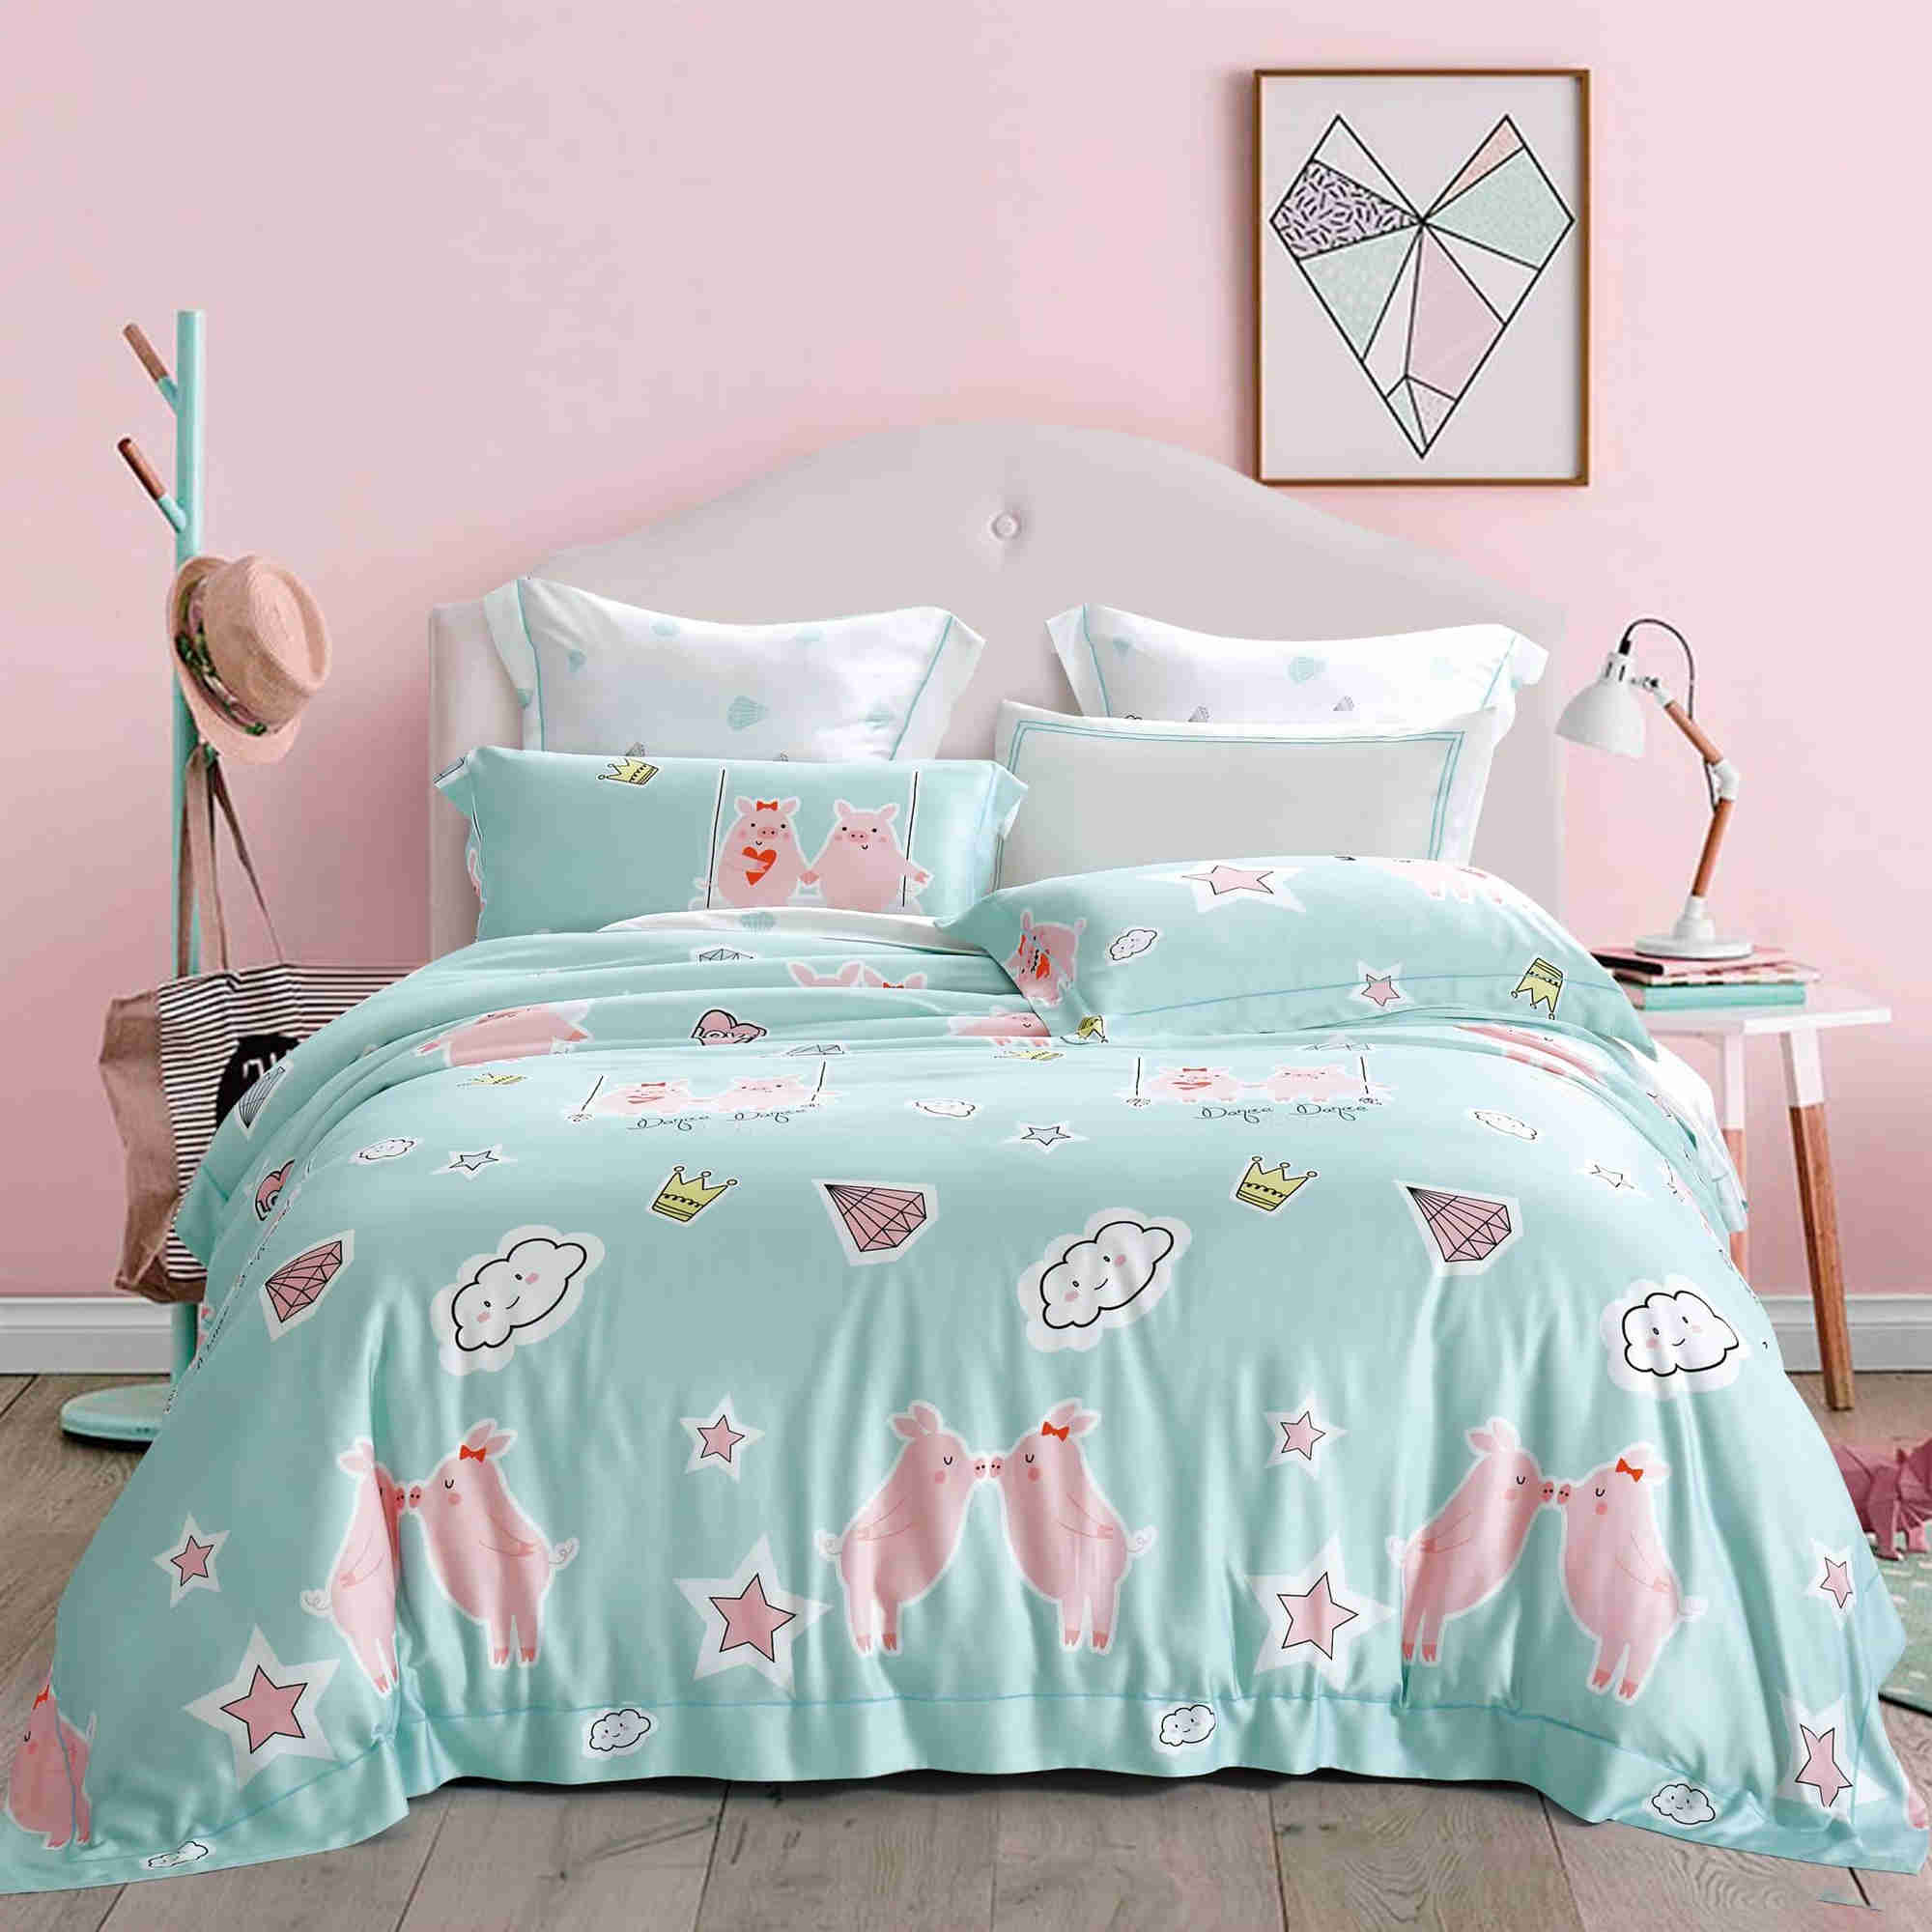 Guangzhou Sndon Nature Material Tencel Fitted Bed Sheet Bedding Set